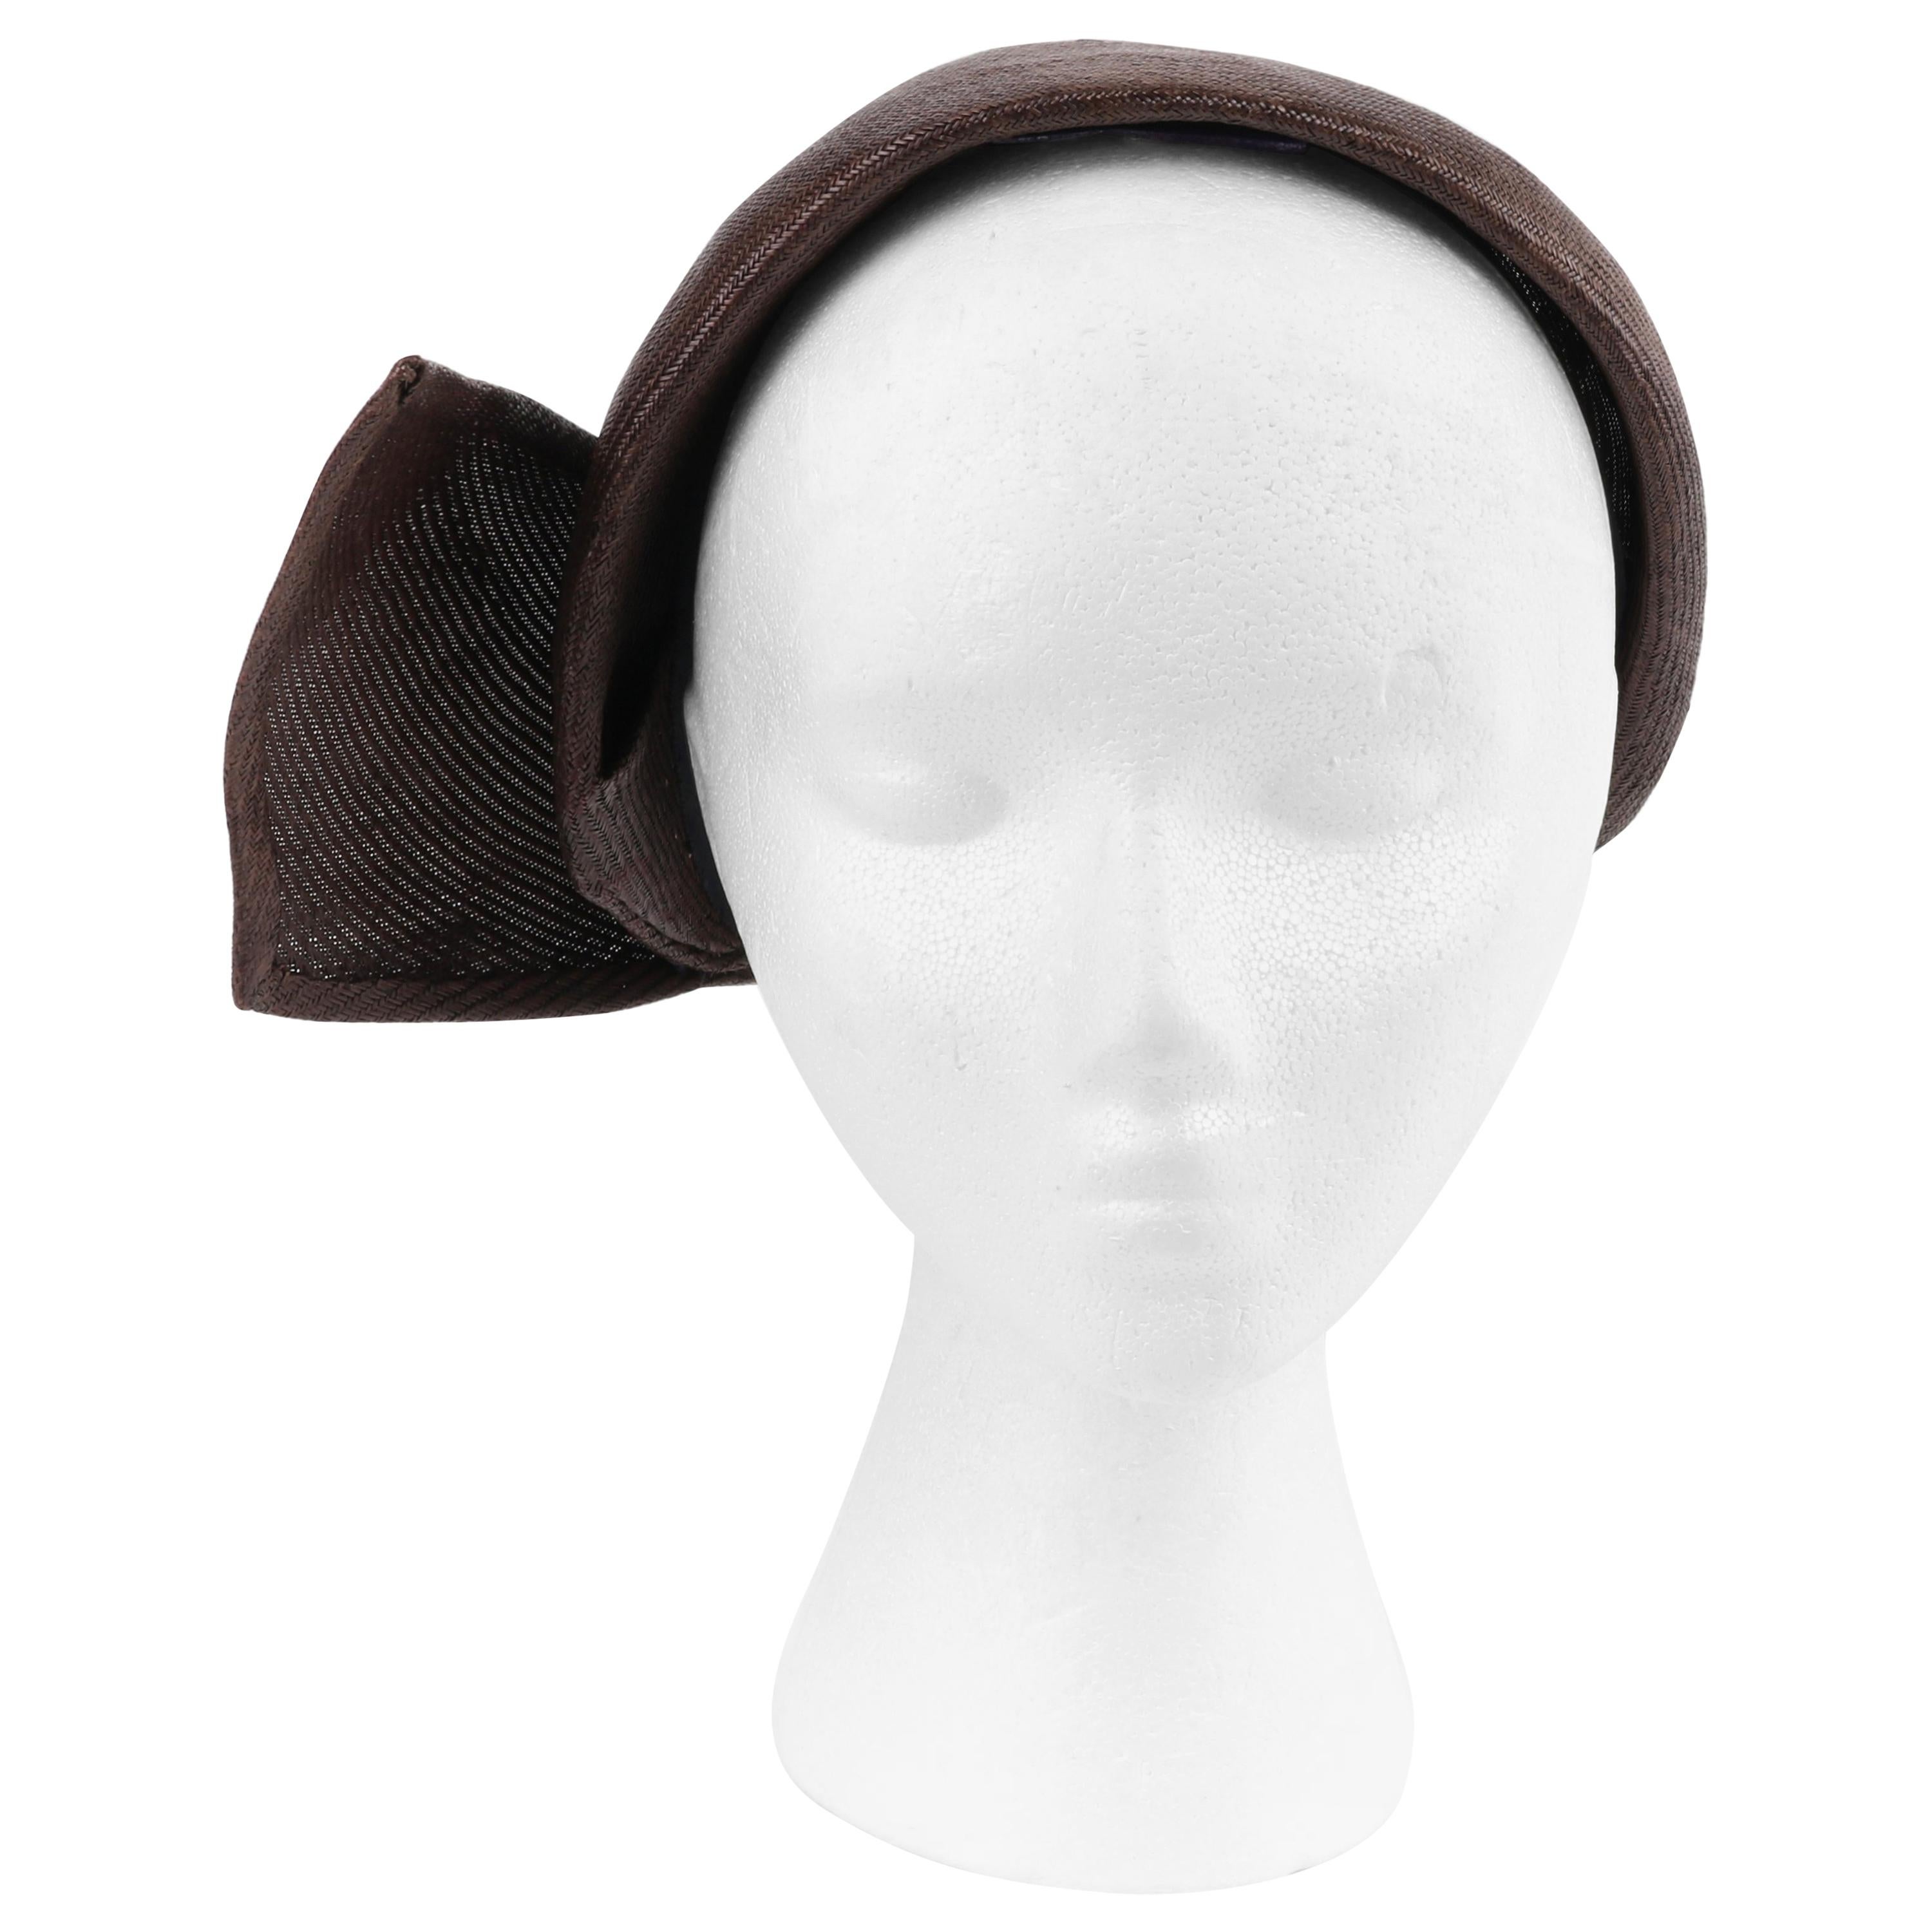 CHRISTIAN DIOR c.1950s Brown Woven Straw Sweeping Knife Pleat Crown Cap Hat